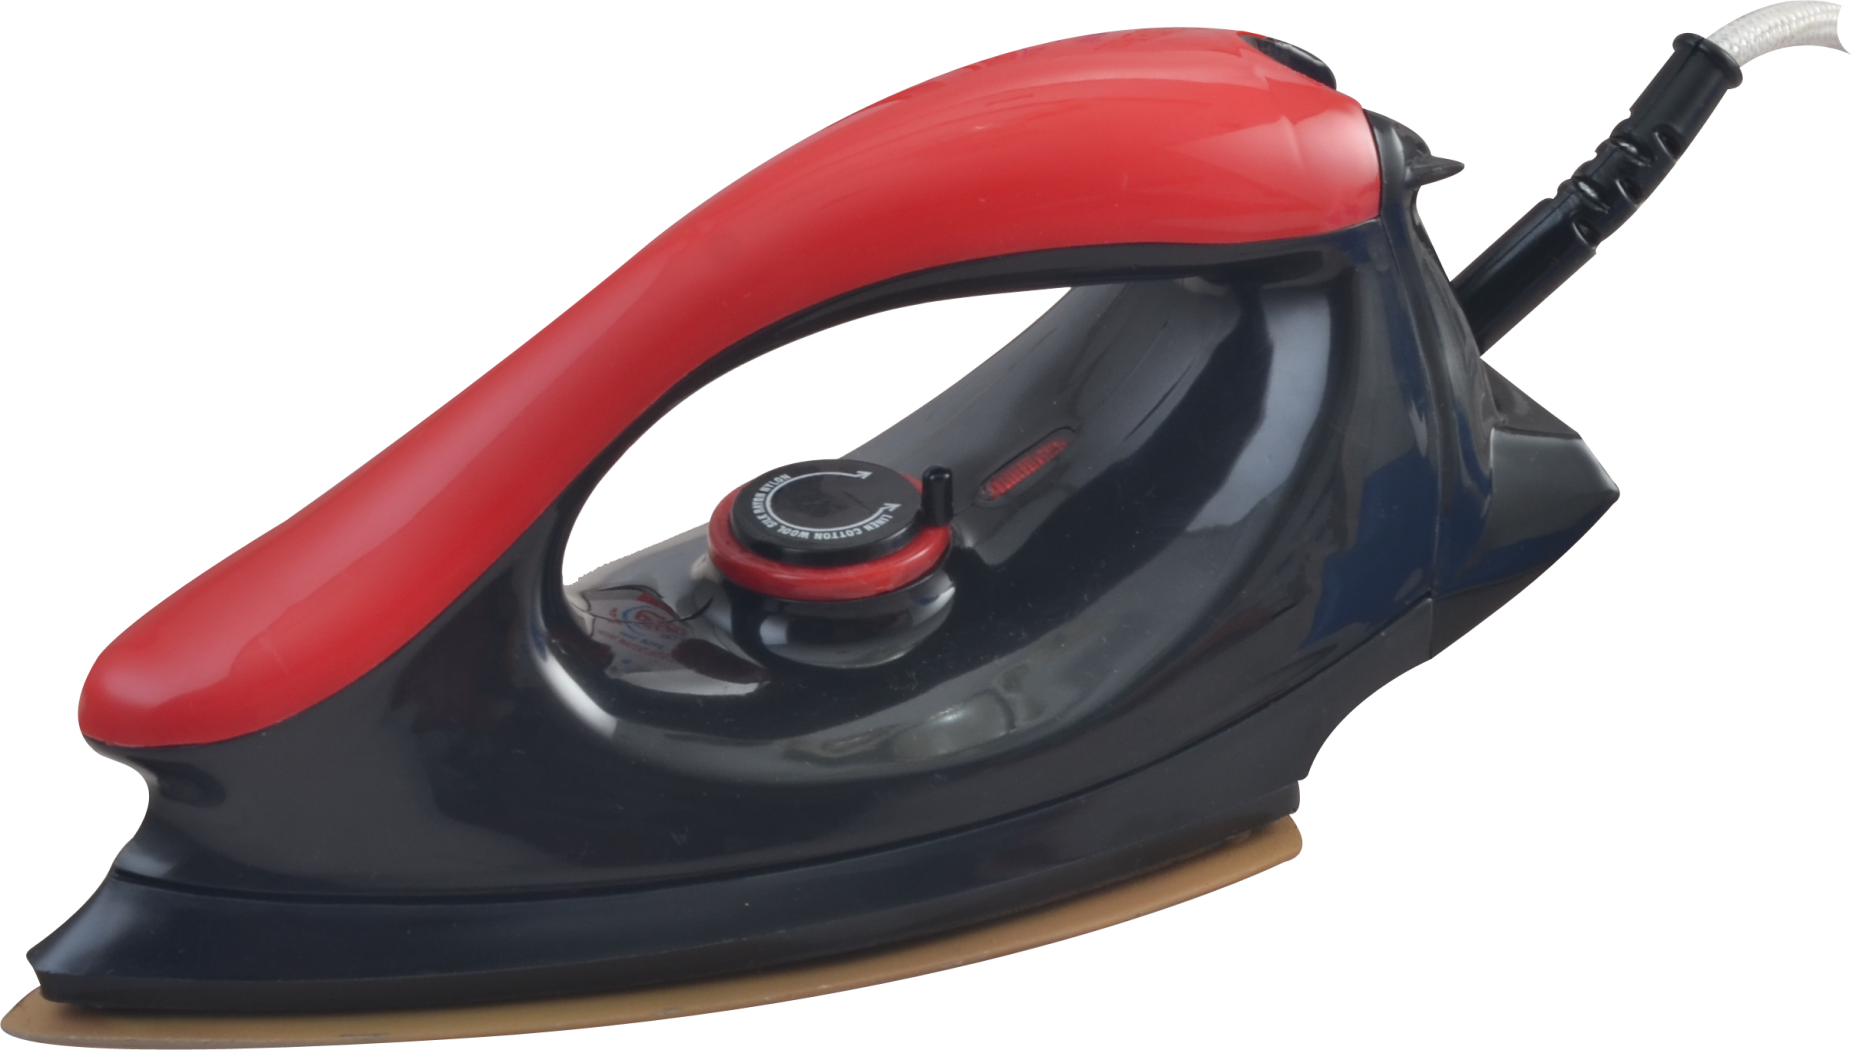 Candes Light Weight Electric Dry Iron Red & Black 100% Non Stick Teflon Coating